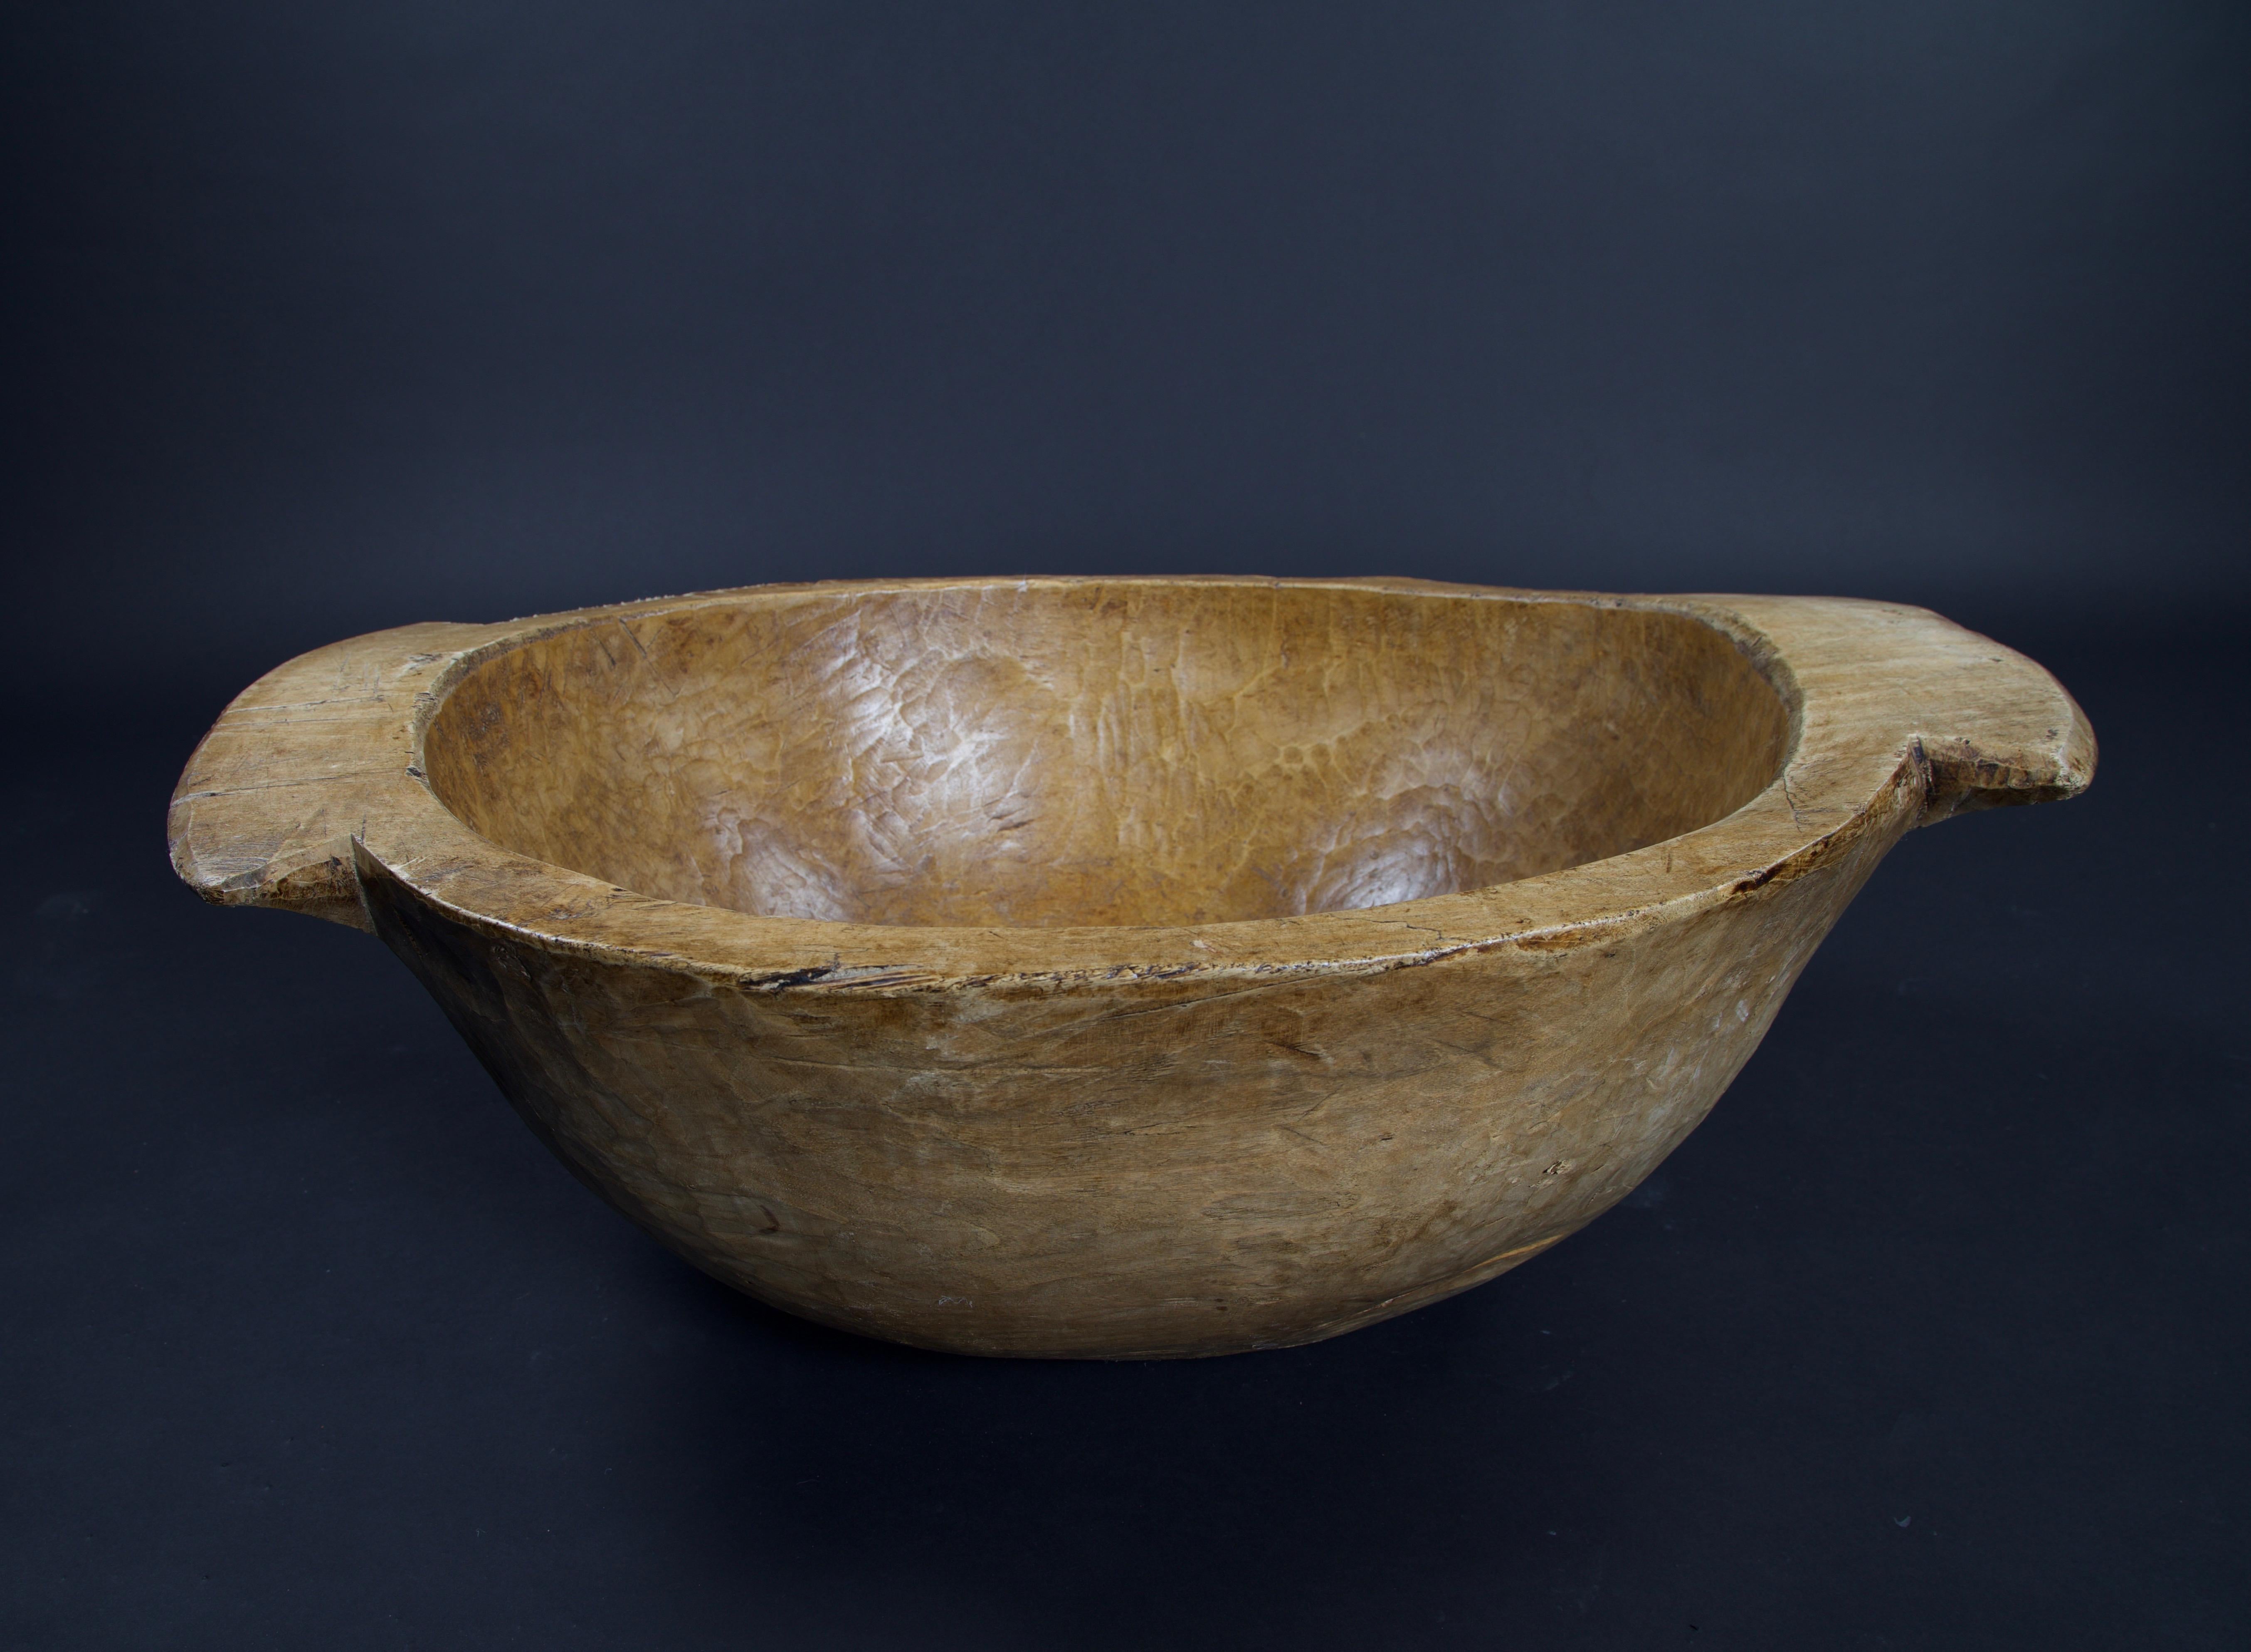 Most dough bowls we see today have a rounded out center, but originally the dough “bowl” was shaped more like a trough or trench. The term trencher comes from the Old French tranchier, which means to cut. In the Middle Ages a “trencher” was a hunk